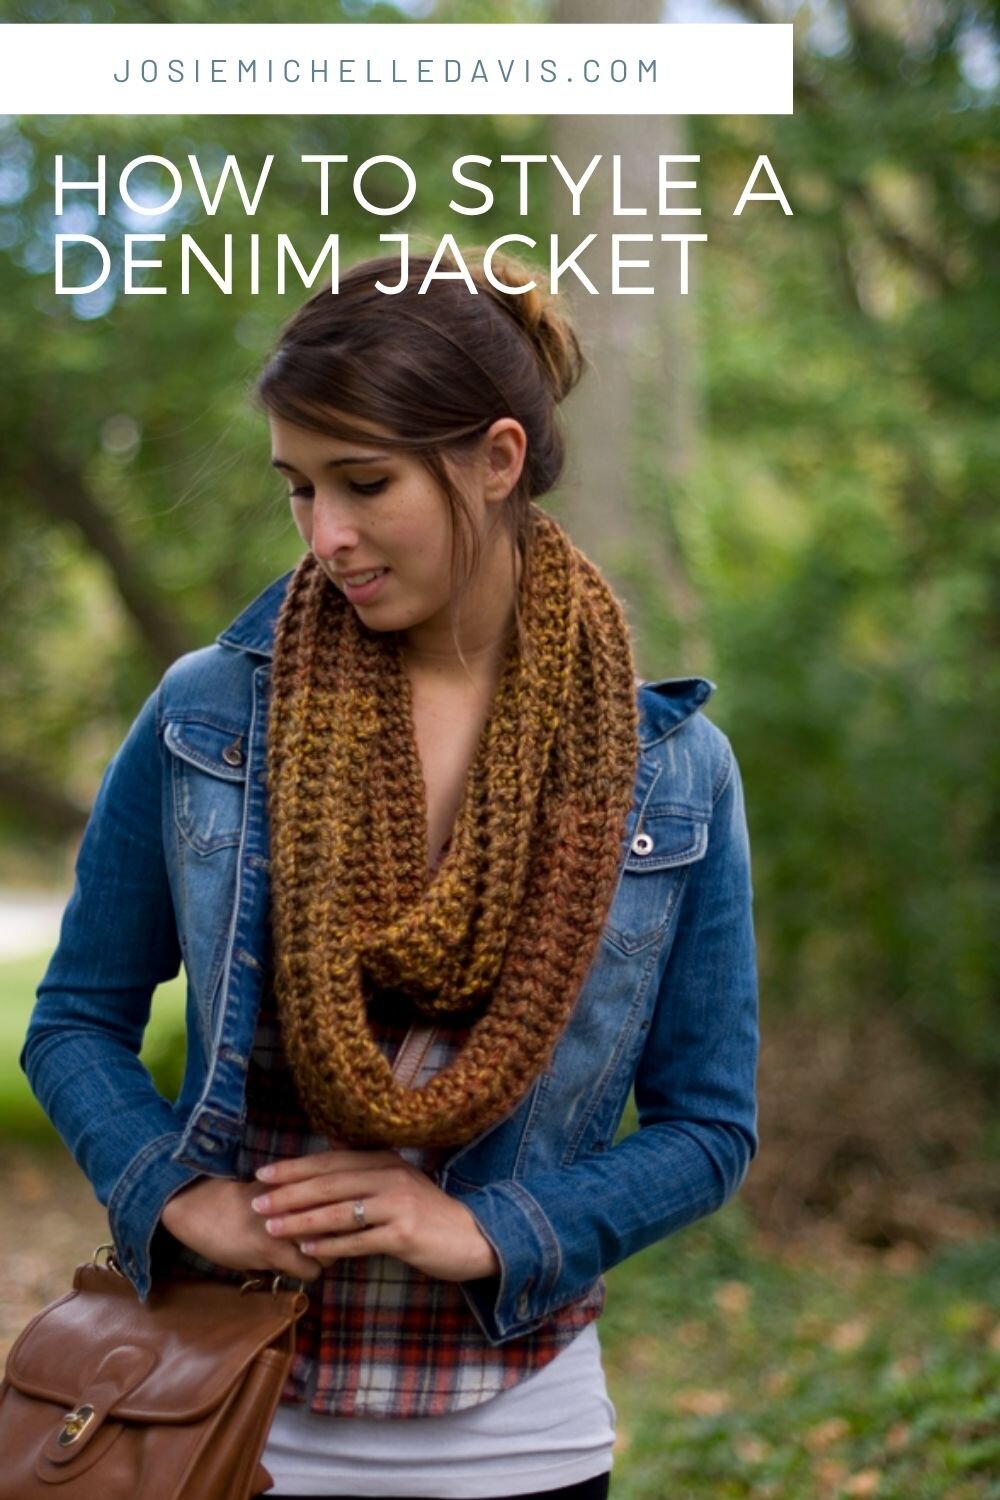 How to Style a Denim Jacket for Fall.jpg